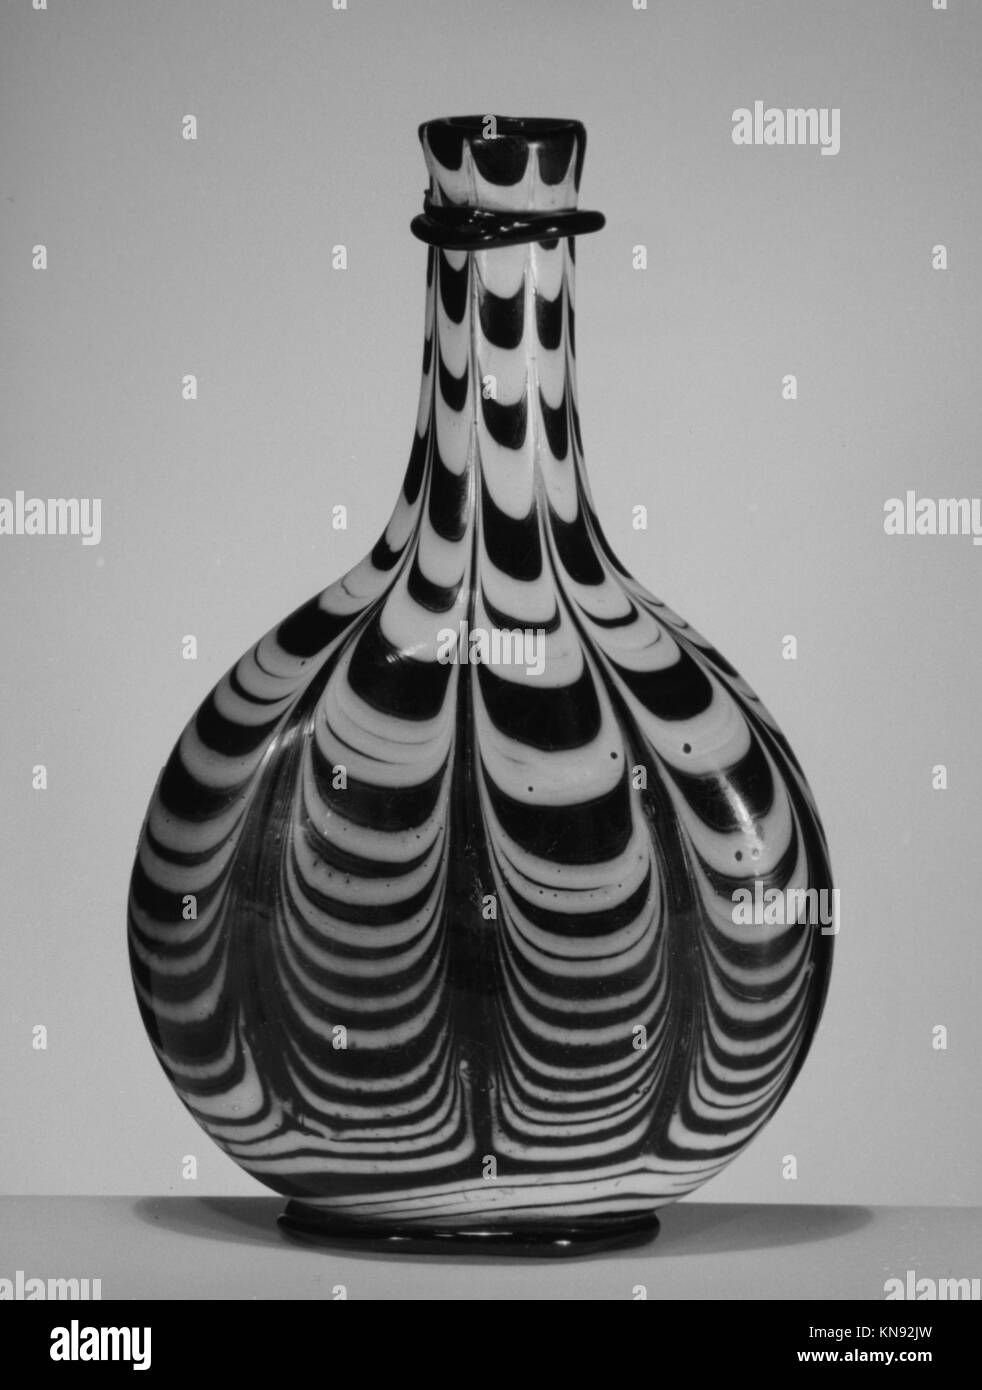 Bottle MET 175989 186448 French, Bottle, 18th century, Glass, Height: 8 1/8 in. (20.6 cm). The Metropolitan Museum of Art, New York. Gift of Henry G. Marquand, 1883 (83.7.183) Stock Photo